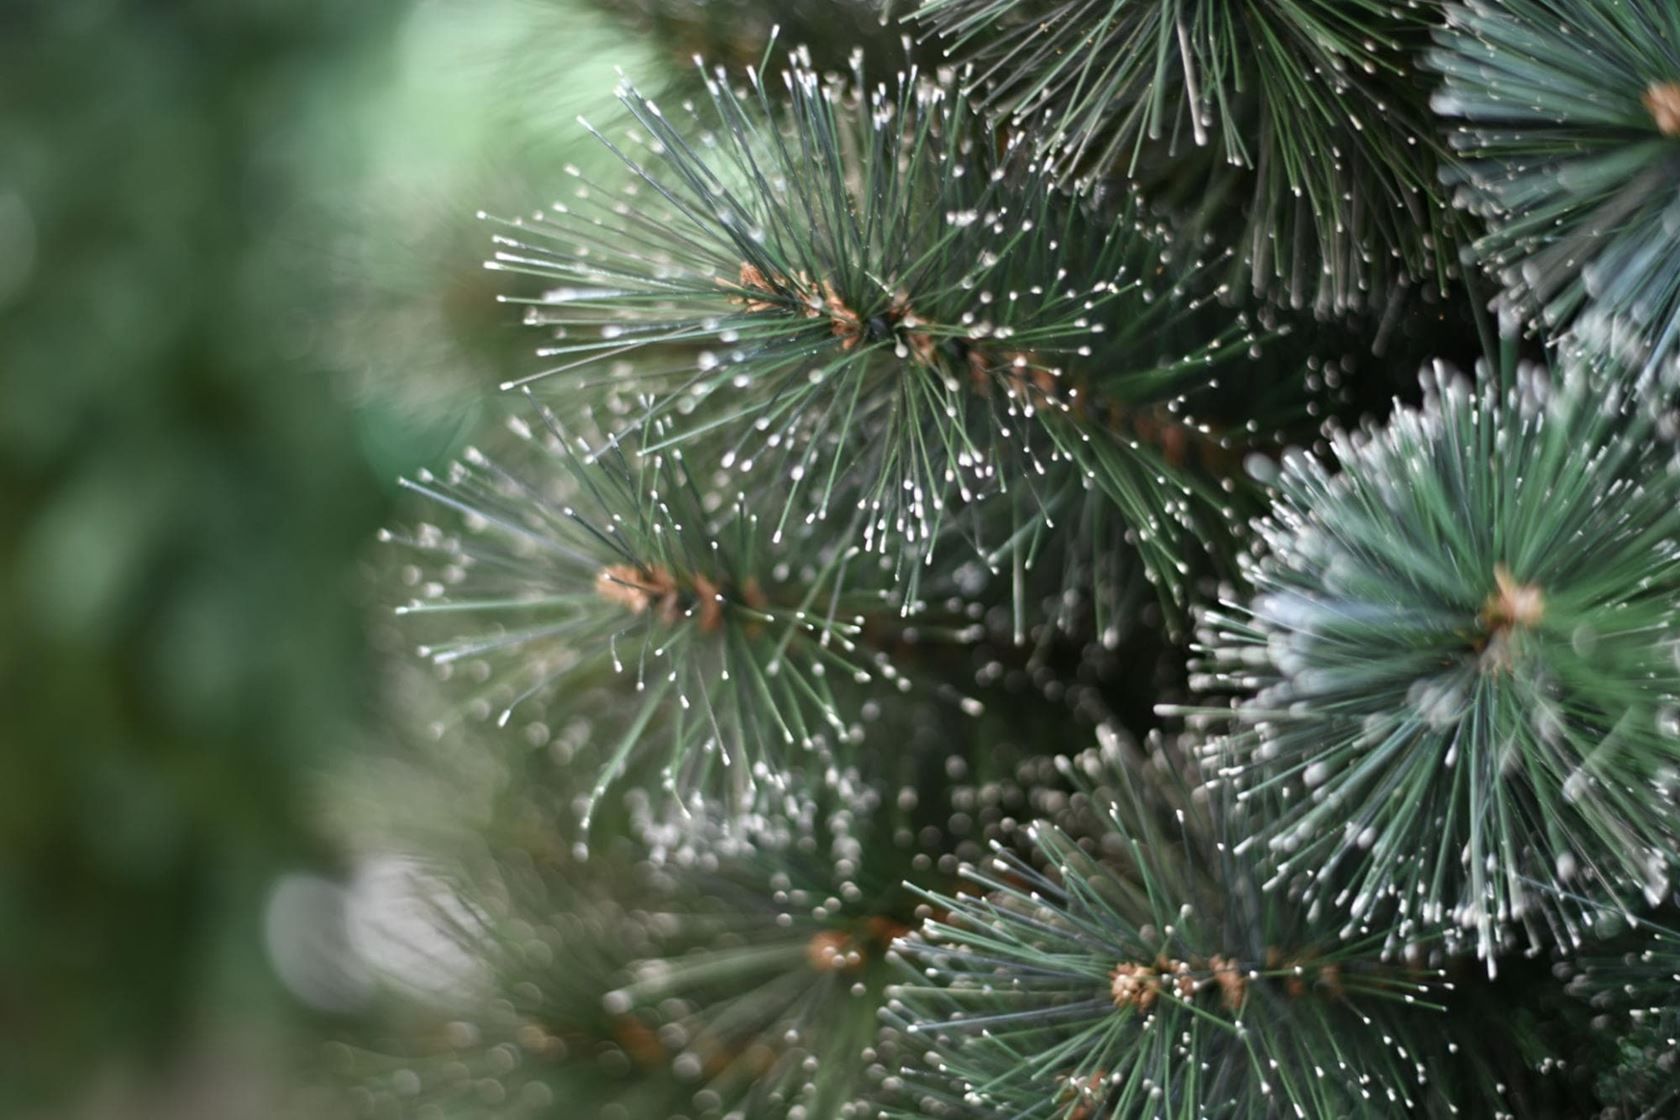 Cleveland-Frosted-Pine-150cm